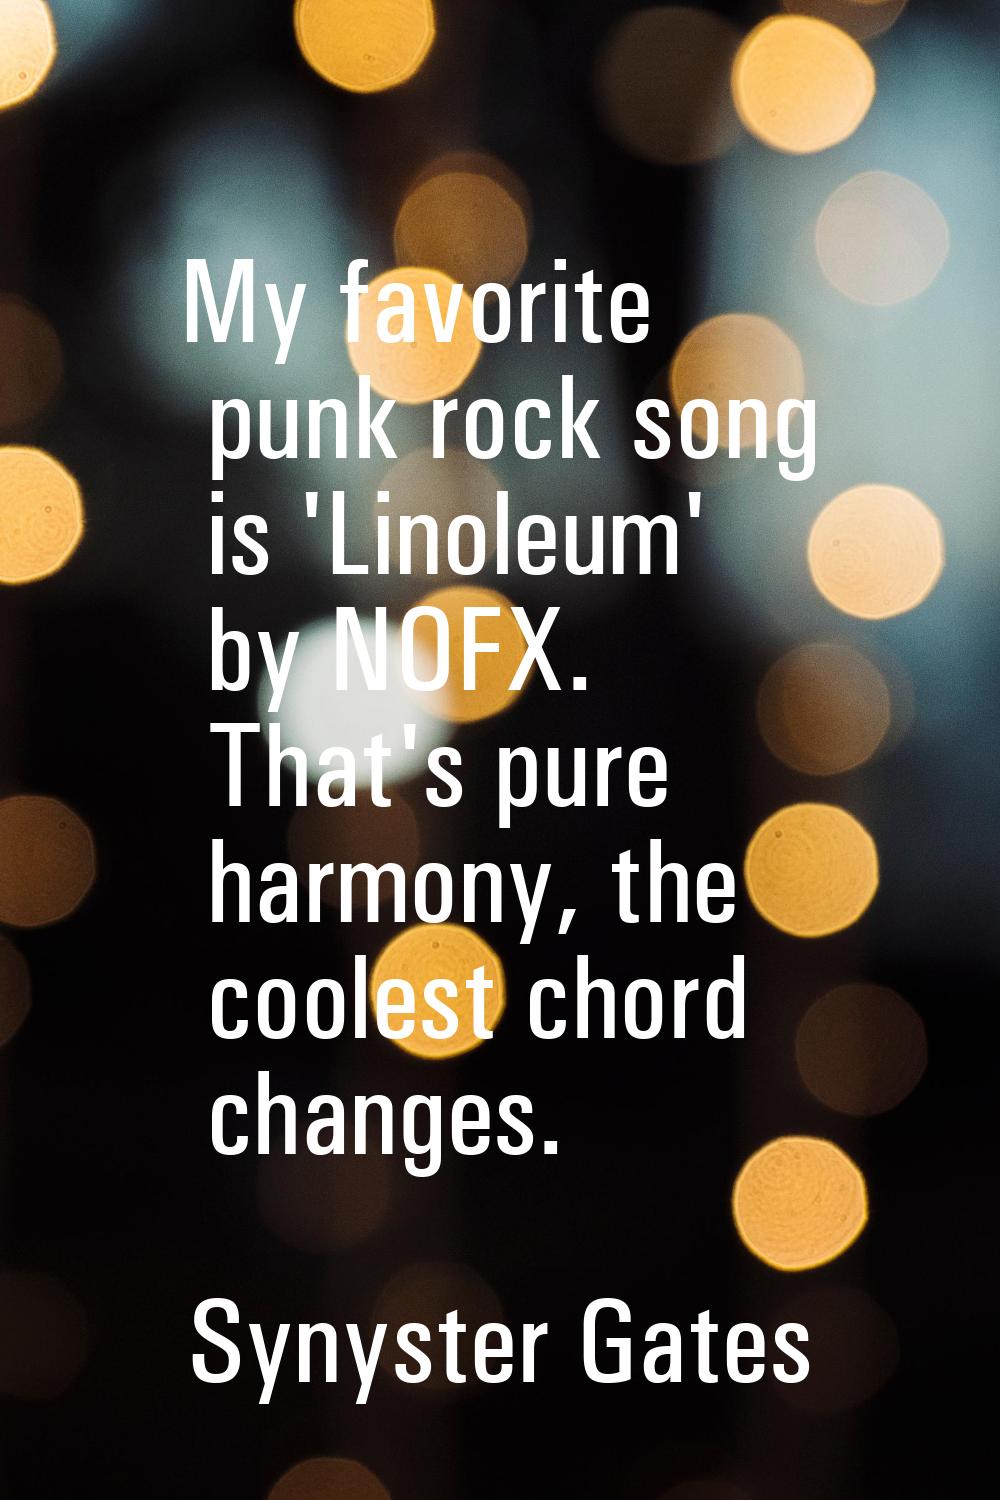 My favorite punk rock song is 'Linoleum' by NOFX. That's pure harmony, the coolest chord changes.